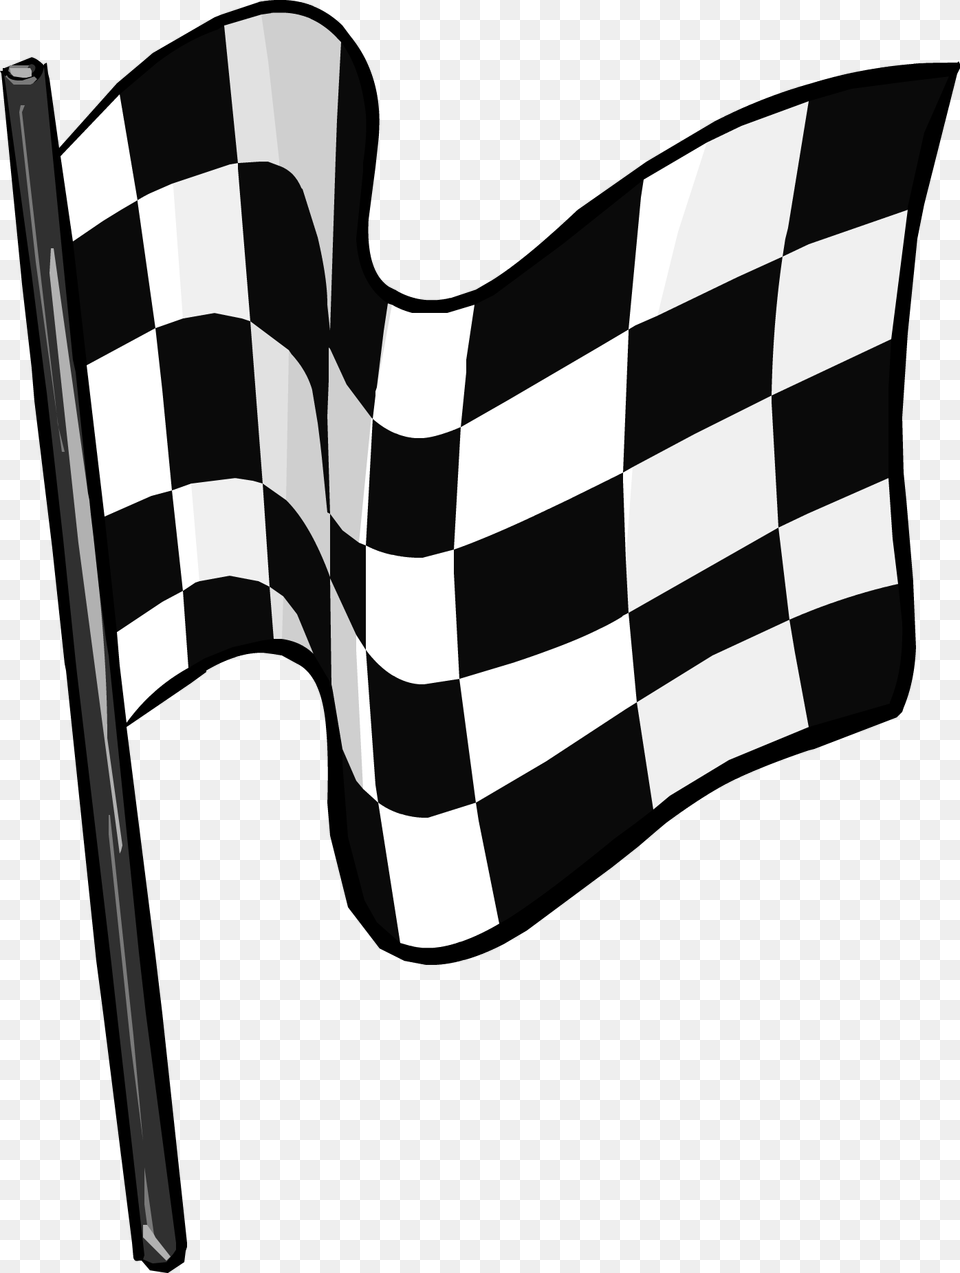 Club Penguin Flag Drapeau Xc3xa0 Damier Clip Art Transparent Racing Flags Clipart, Smoke Pipe, Stencil, Accessories, Formal Wear Free Png Download